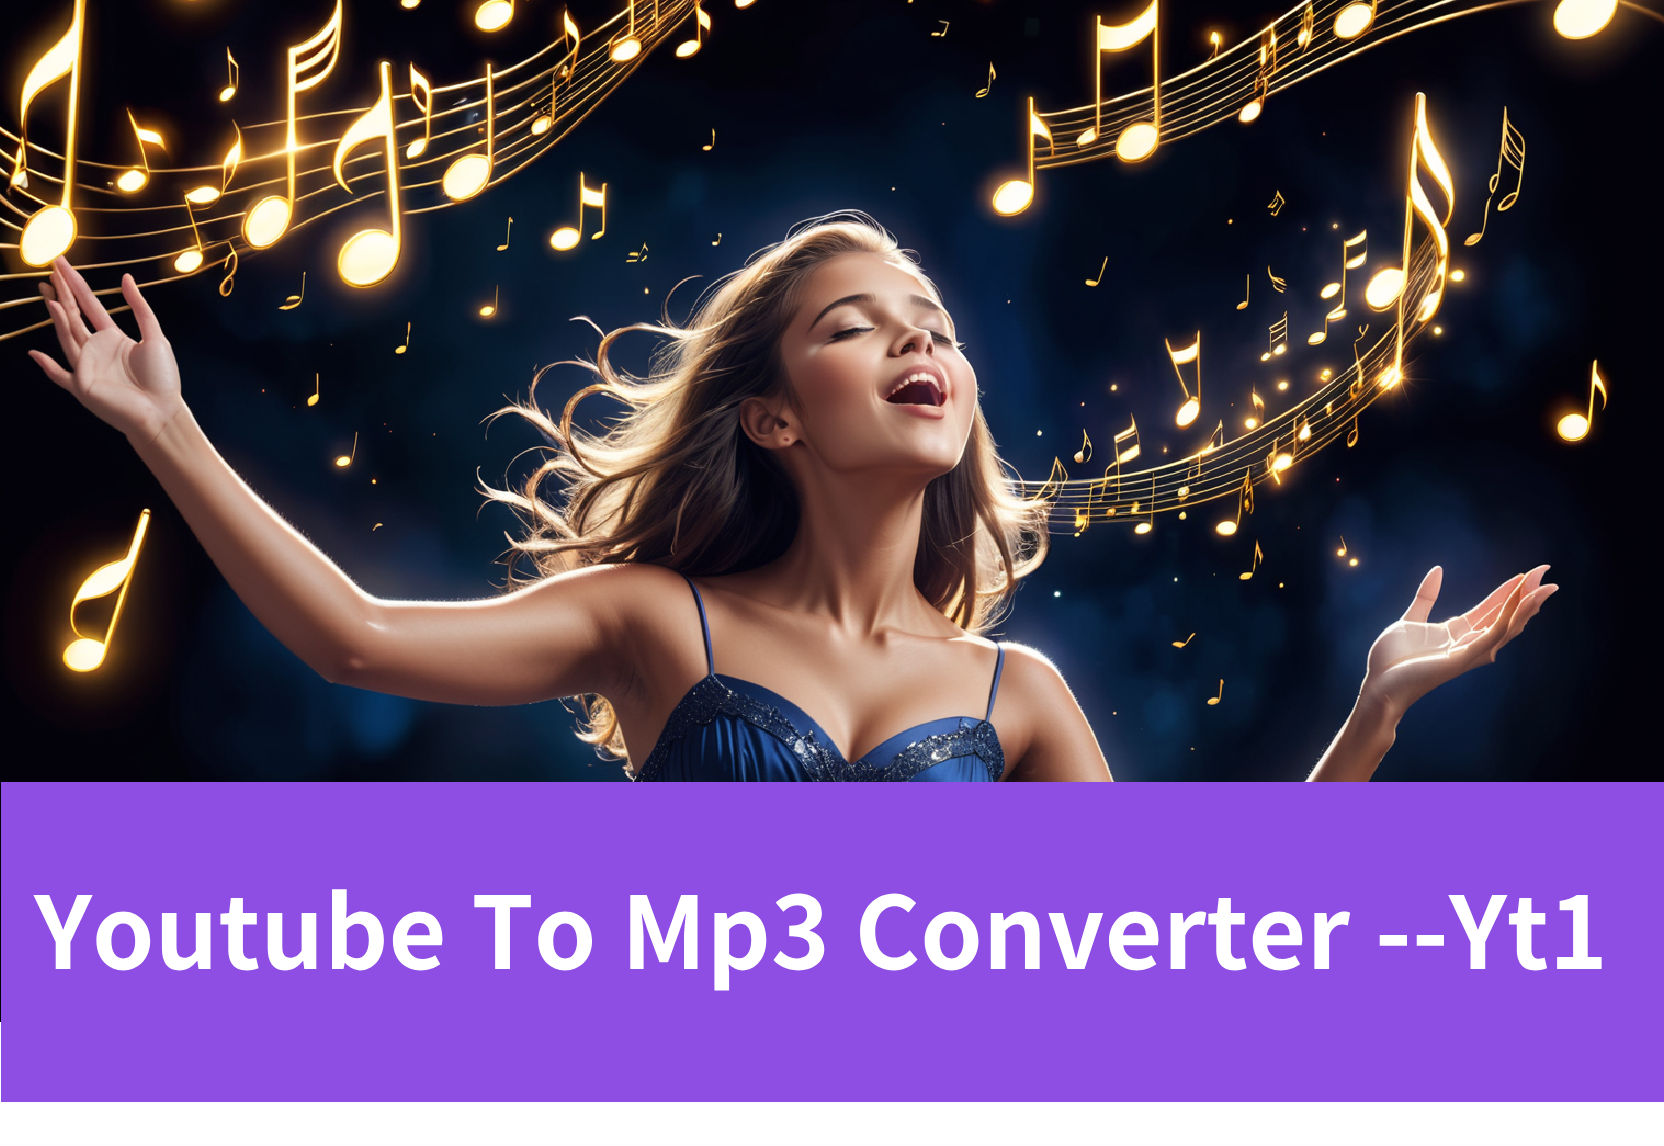 YT1: Free YouTube to MP3 Conversion